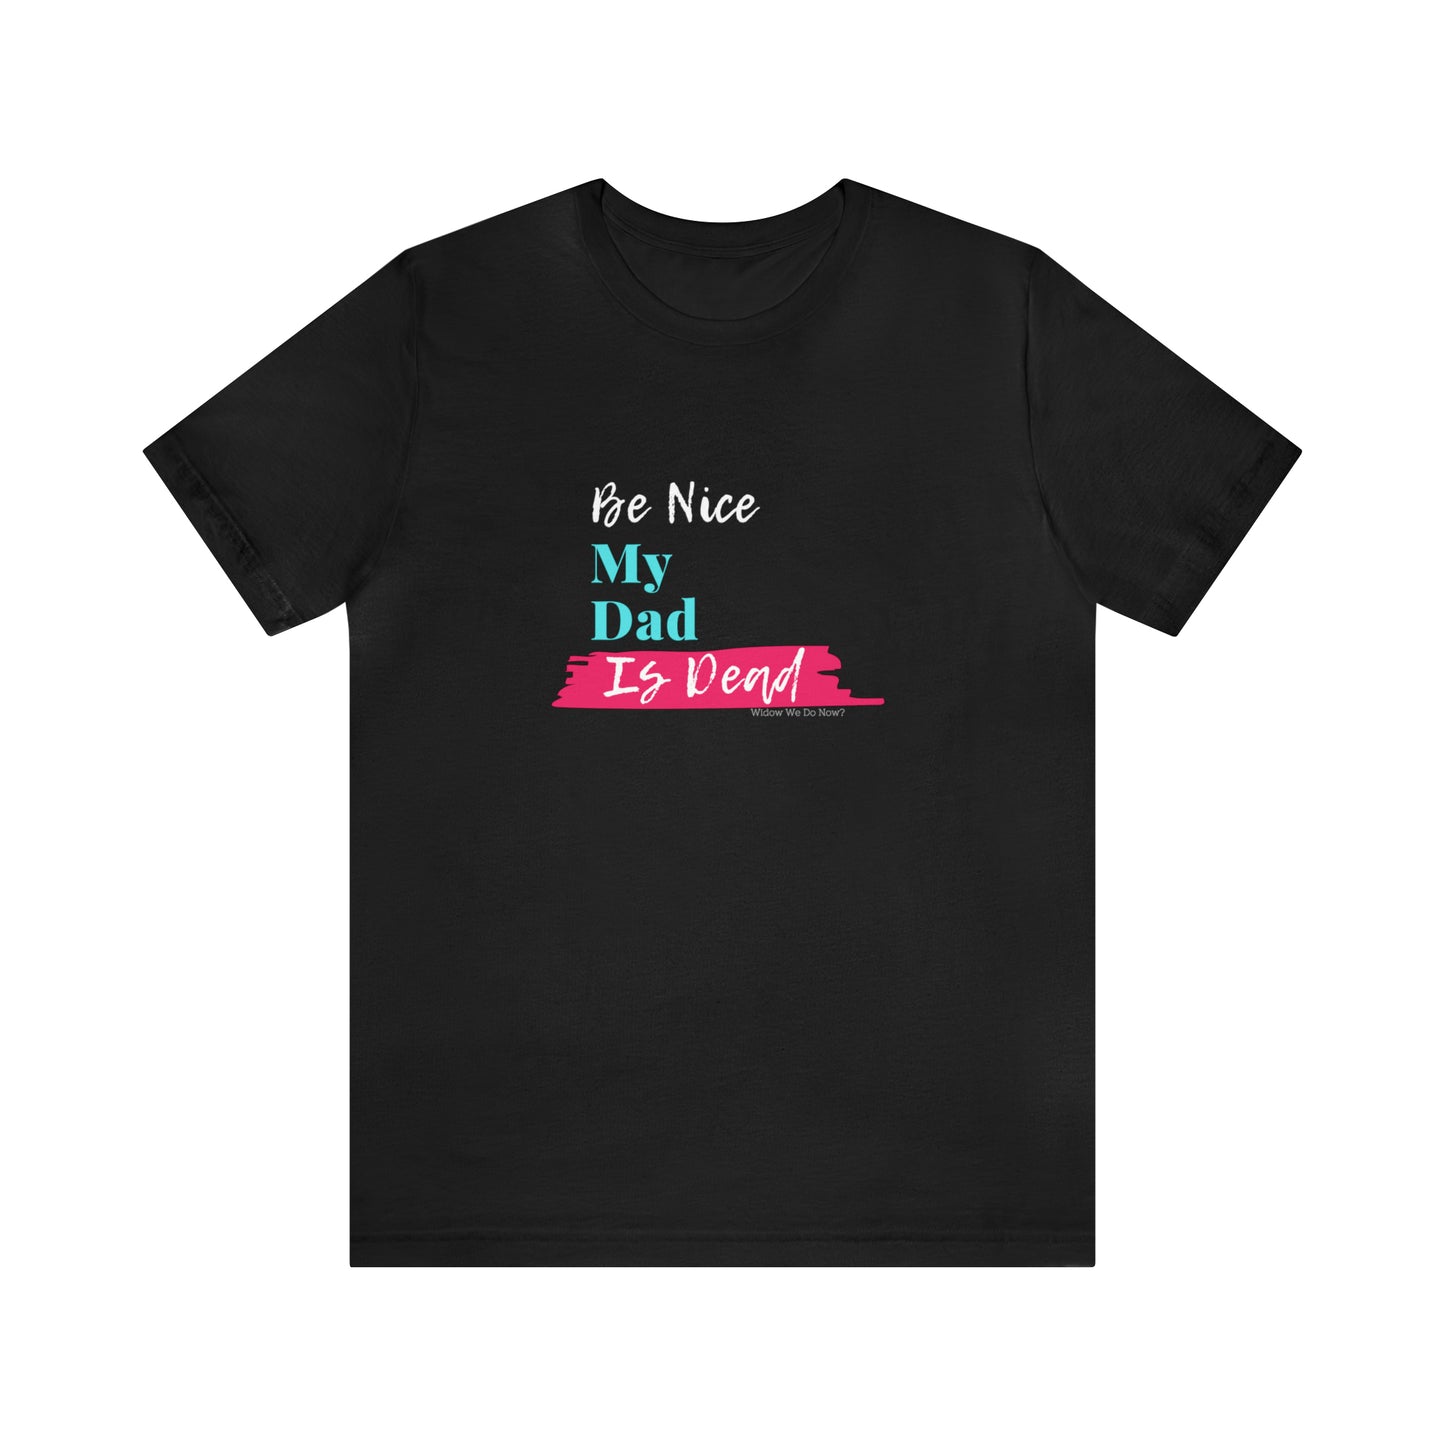 Be Nice My Dad Is Dead ADULT SIZES